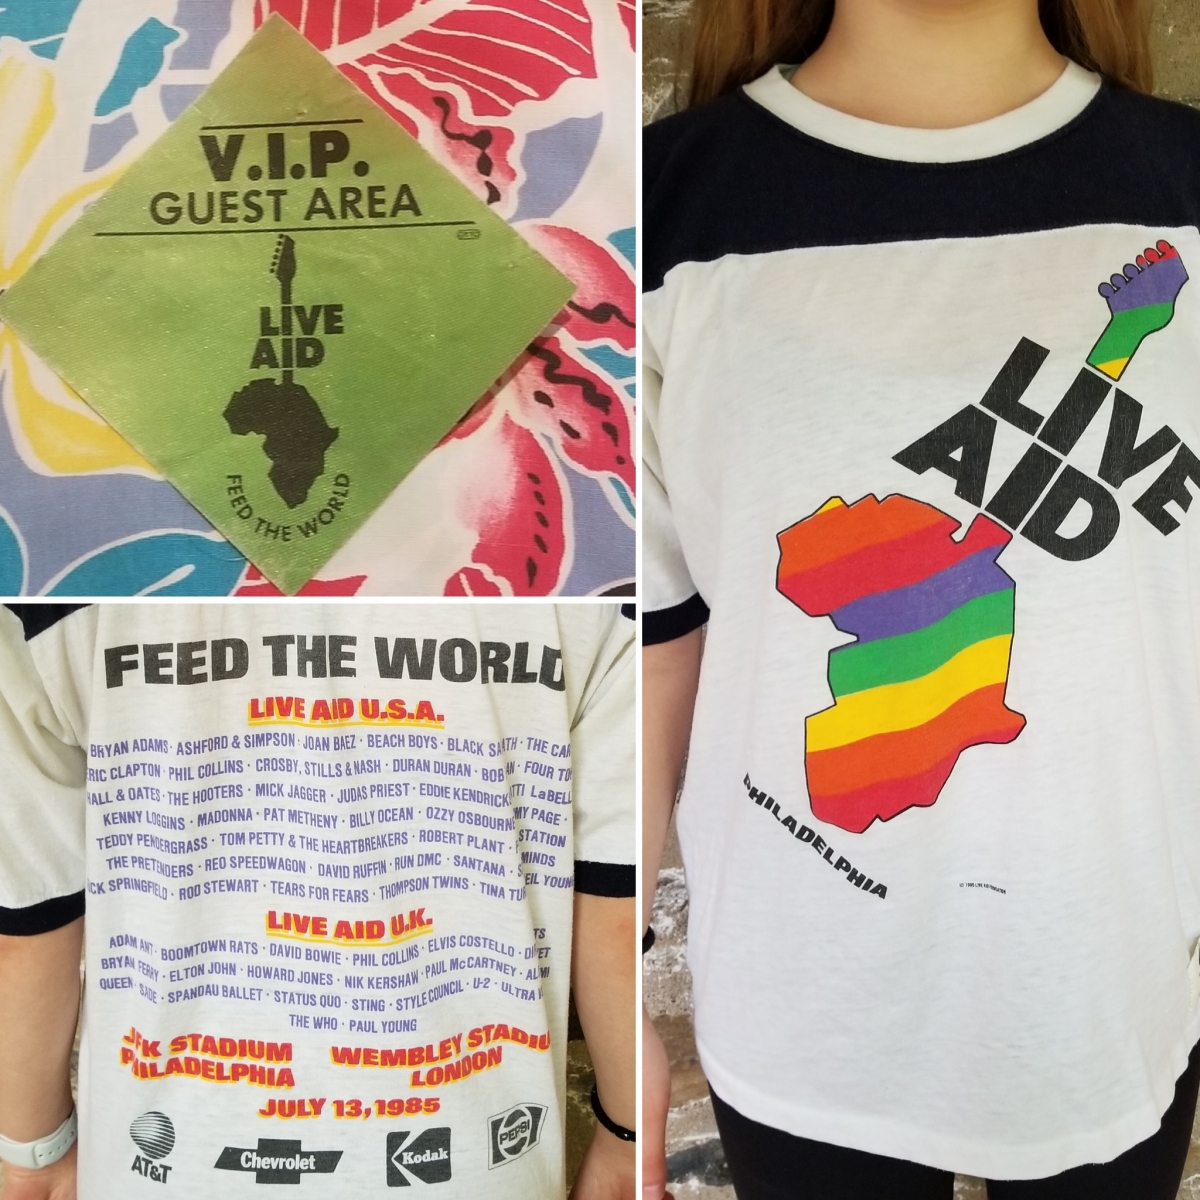 Official Live Aid T-Shirt and Backstage Pass, JFK Stadium, Philadelphia, July 13, 1985